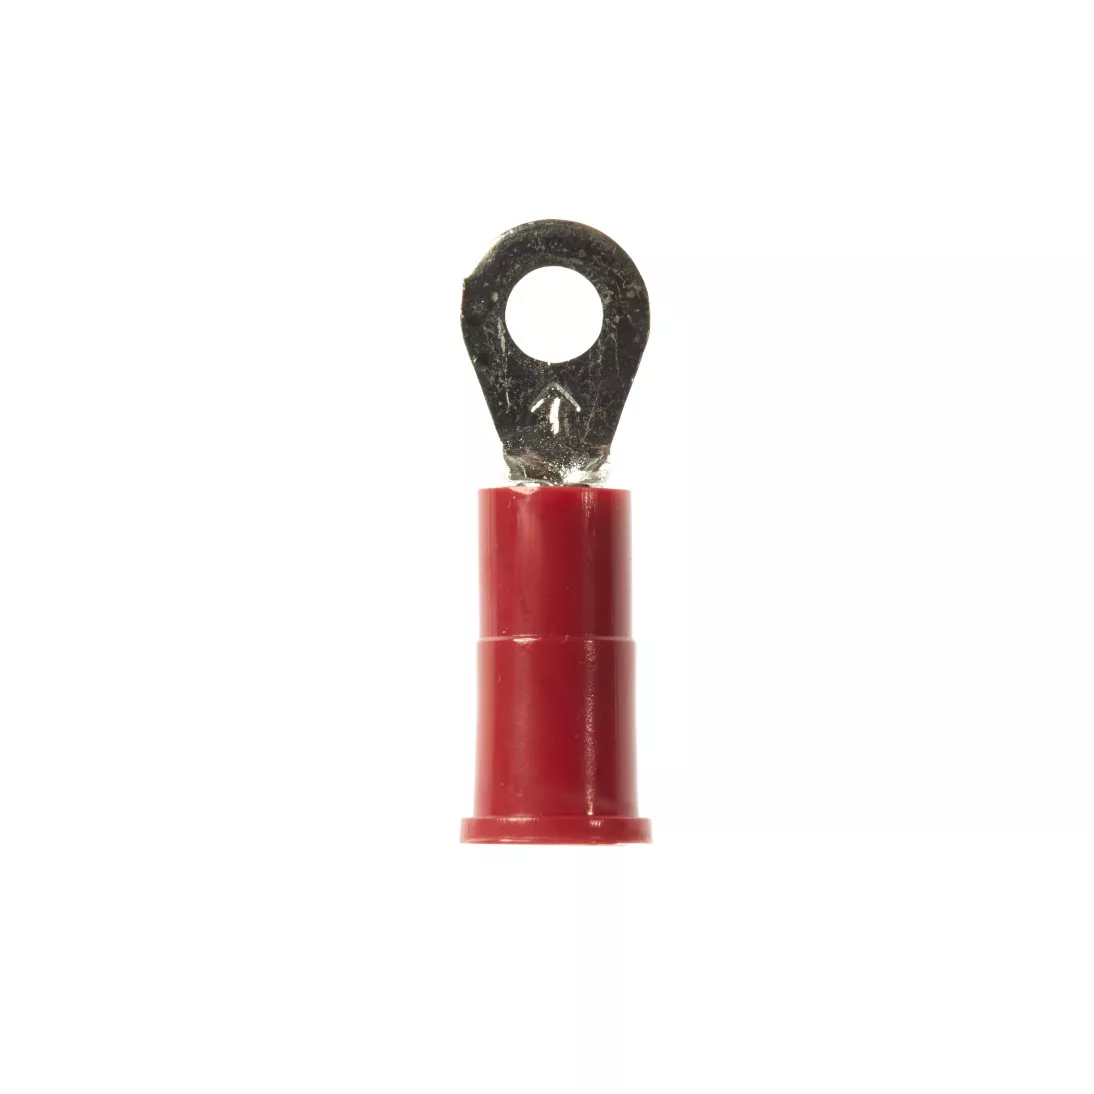 3M™ Scotchlok™ Ring Vinyl Insulated, 100/bottle, MV18-4R/SX,
standard-style ring tongue fits around the stud, 500/Case